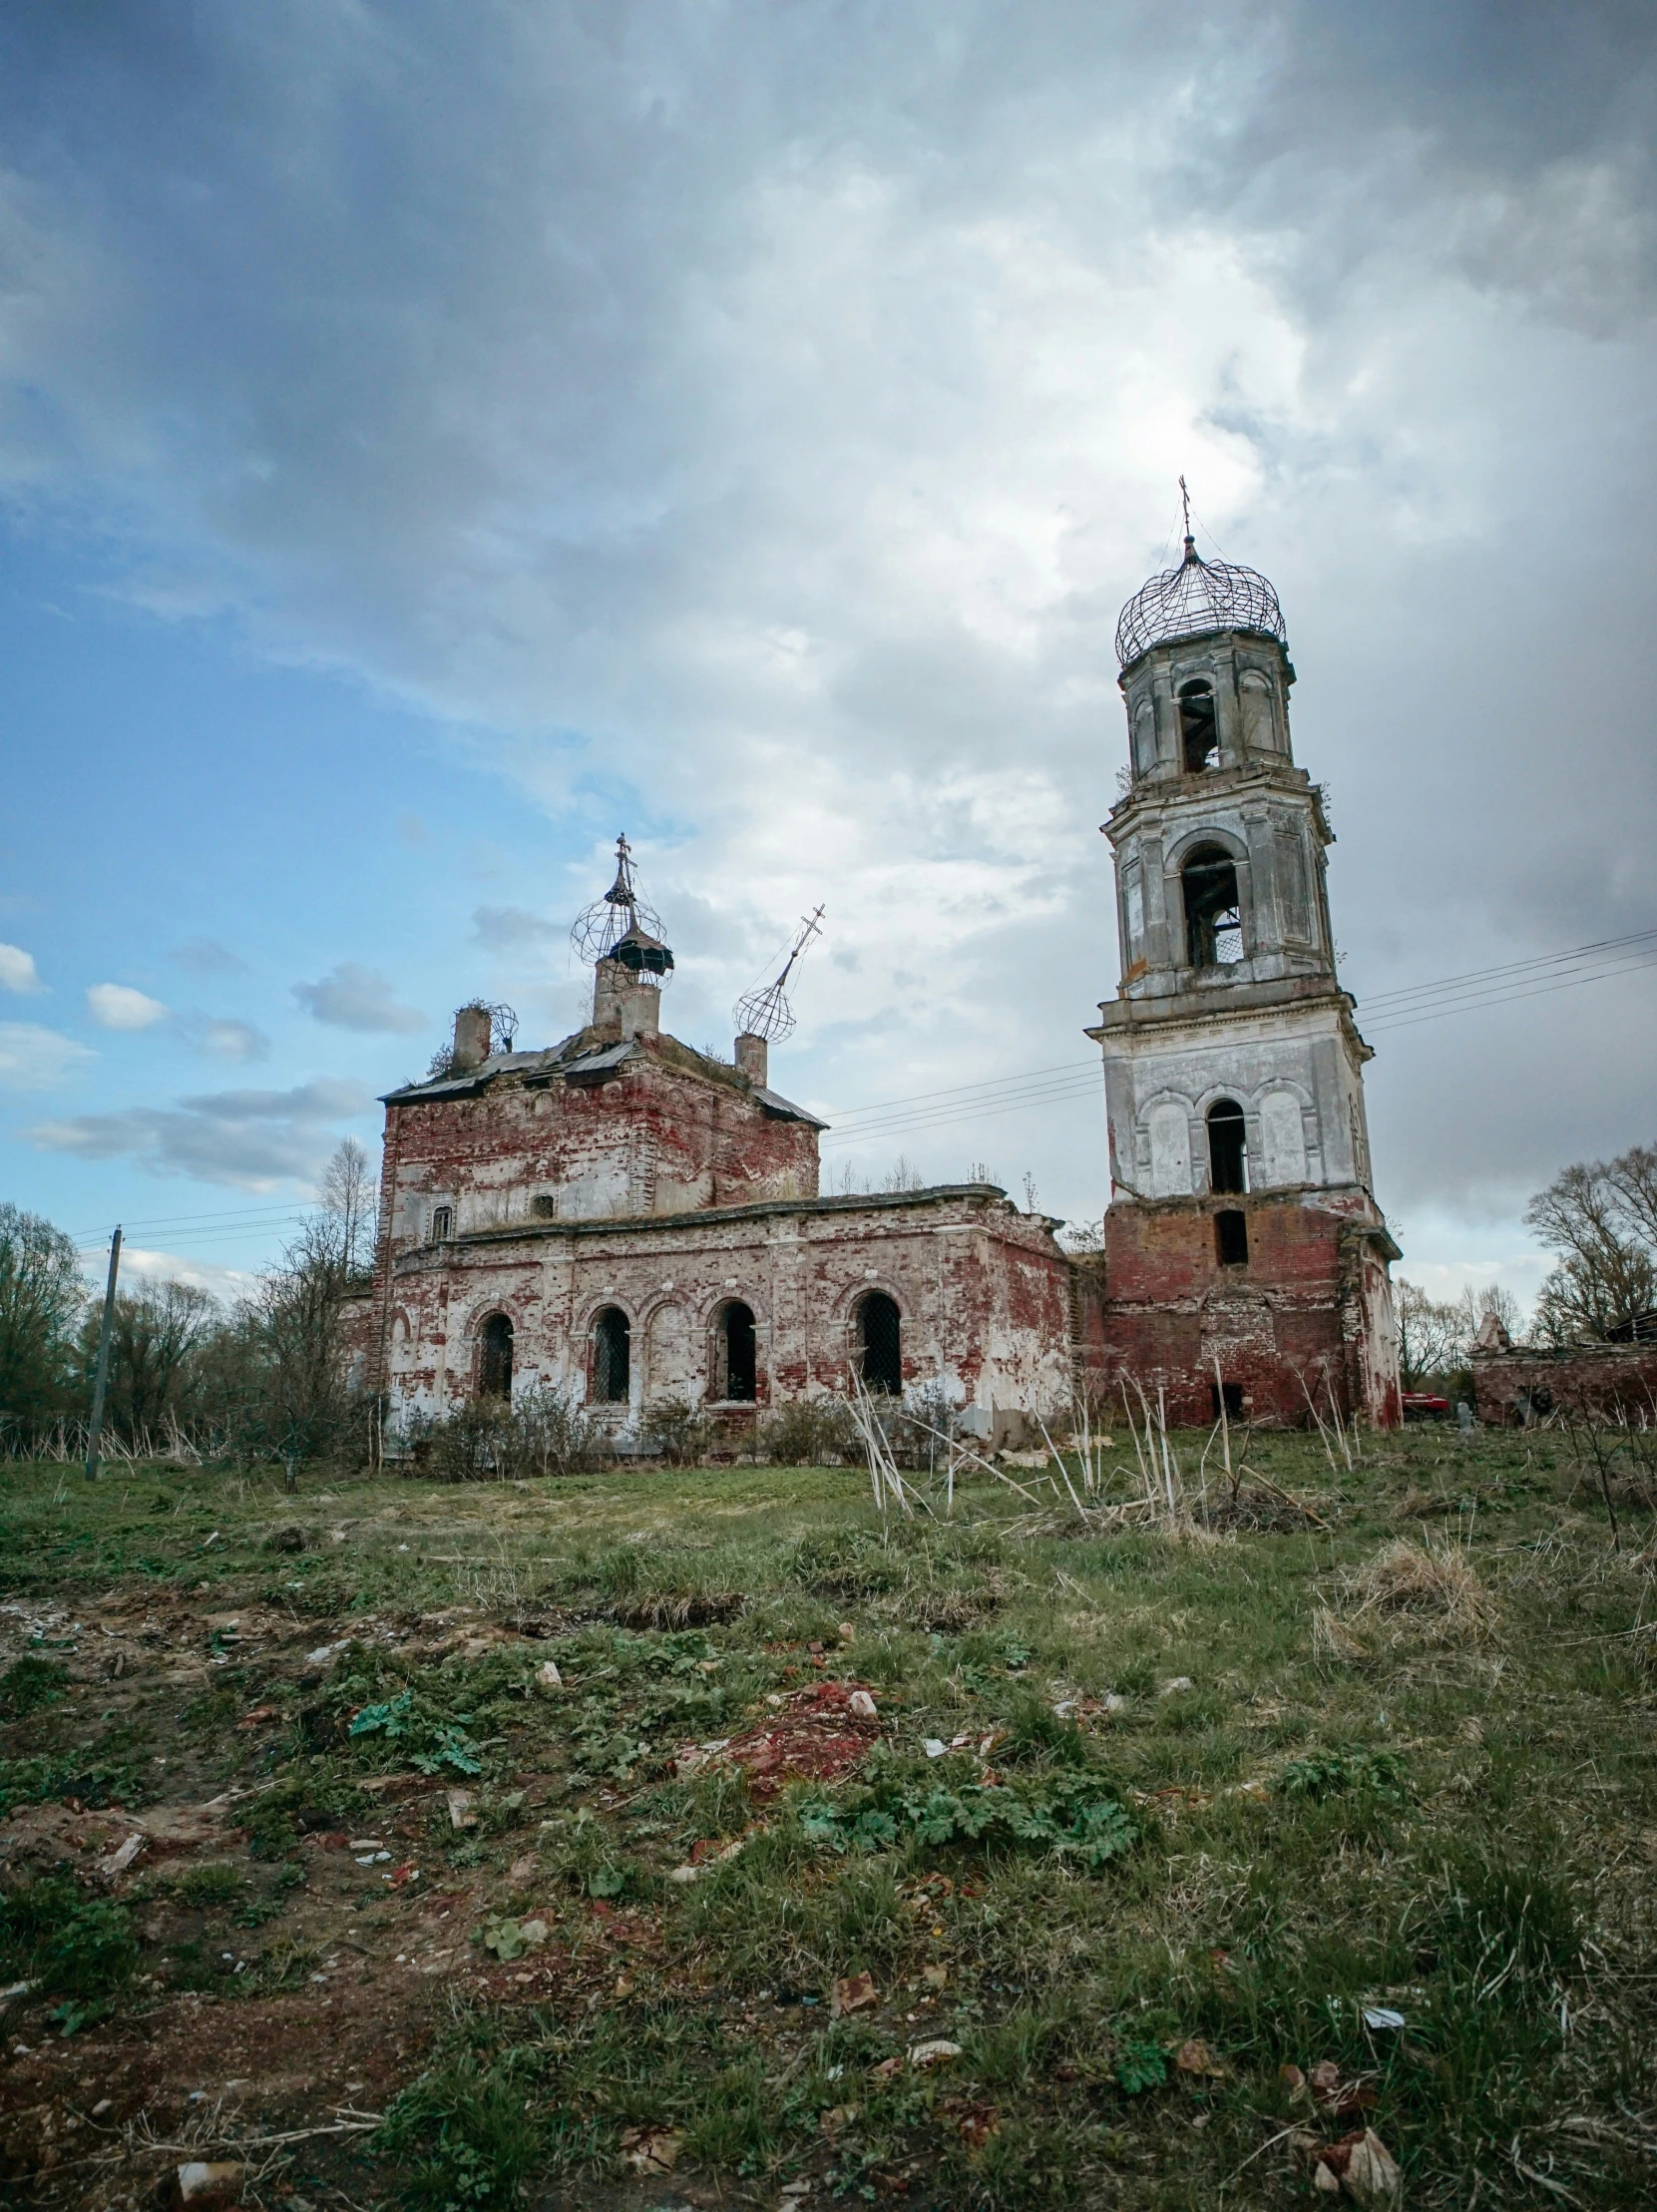 a dilapidated building with two towers on the side